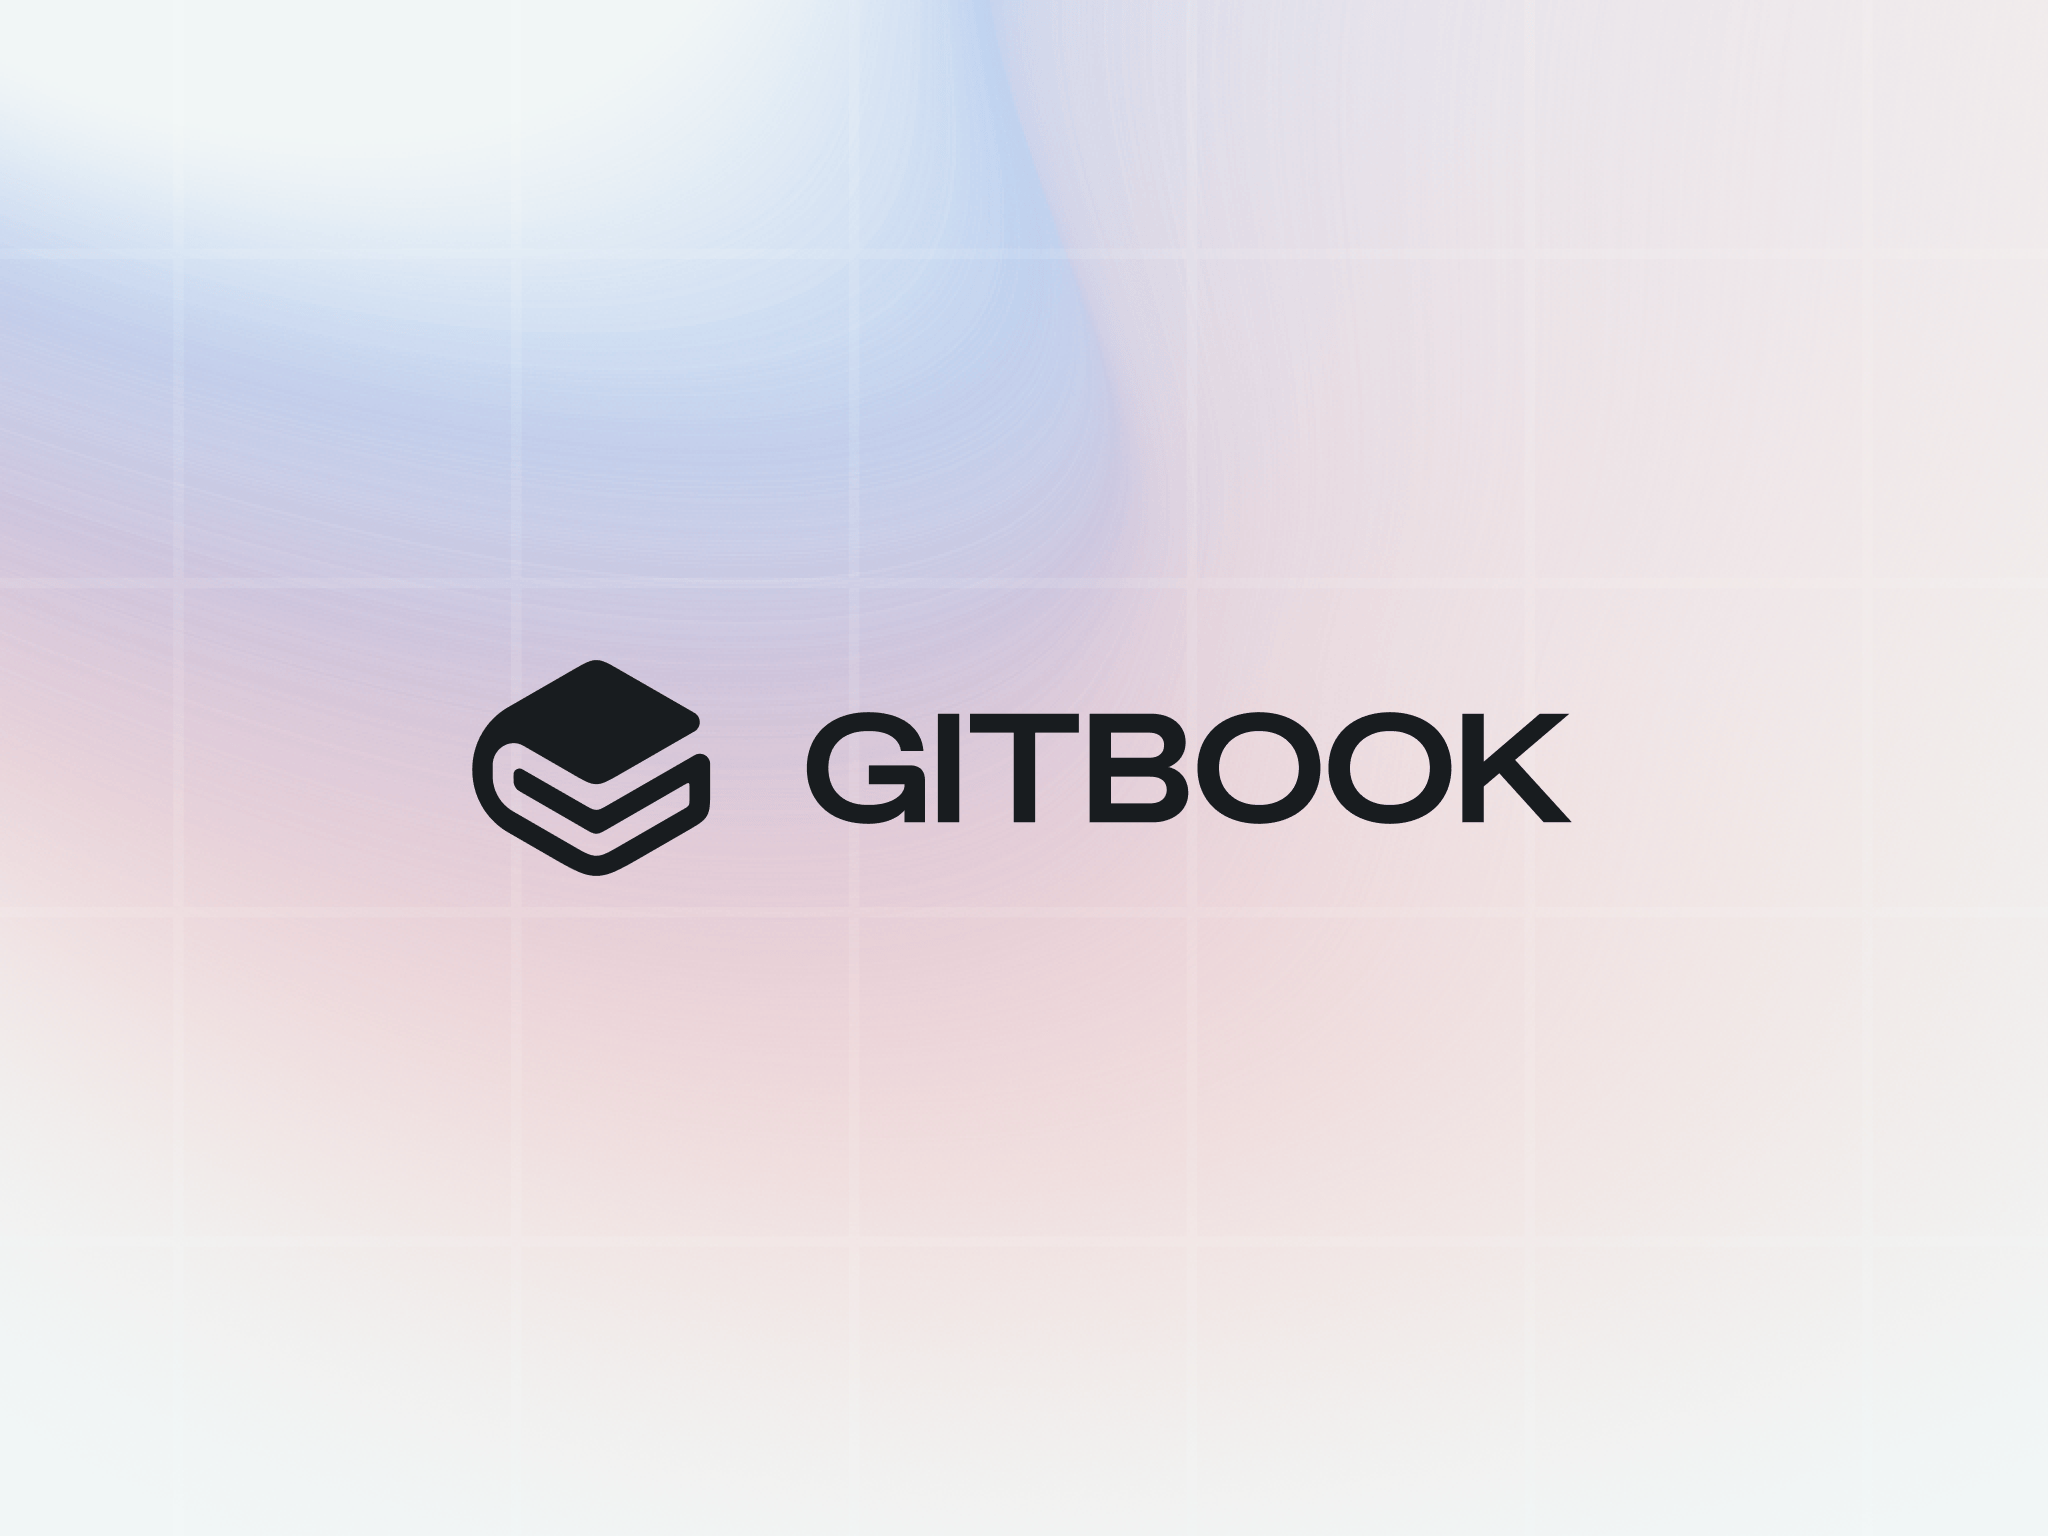 The new GitBook logo on a pink, blue and white gradient background